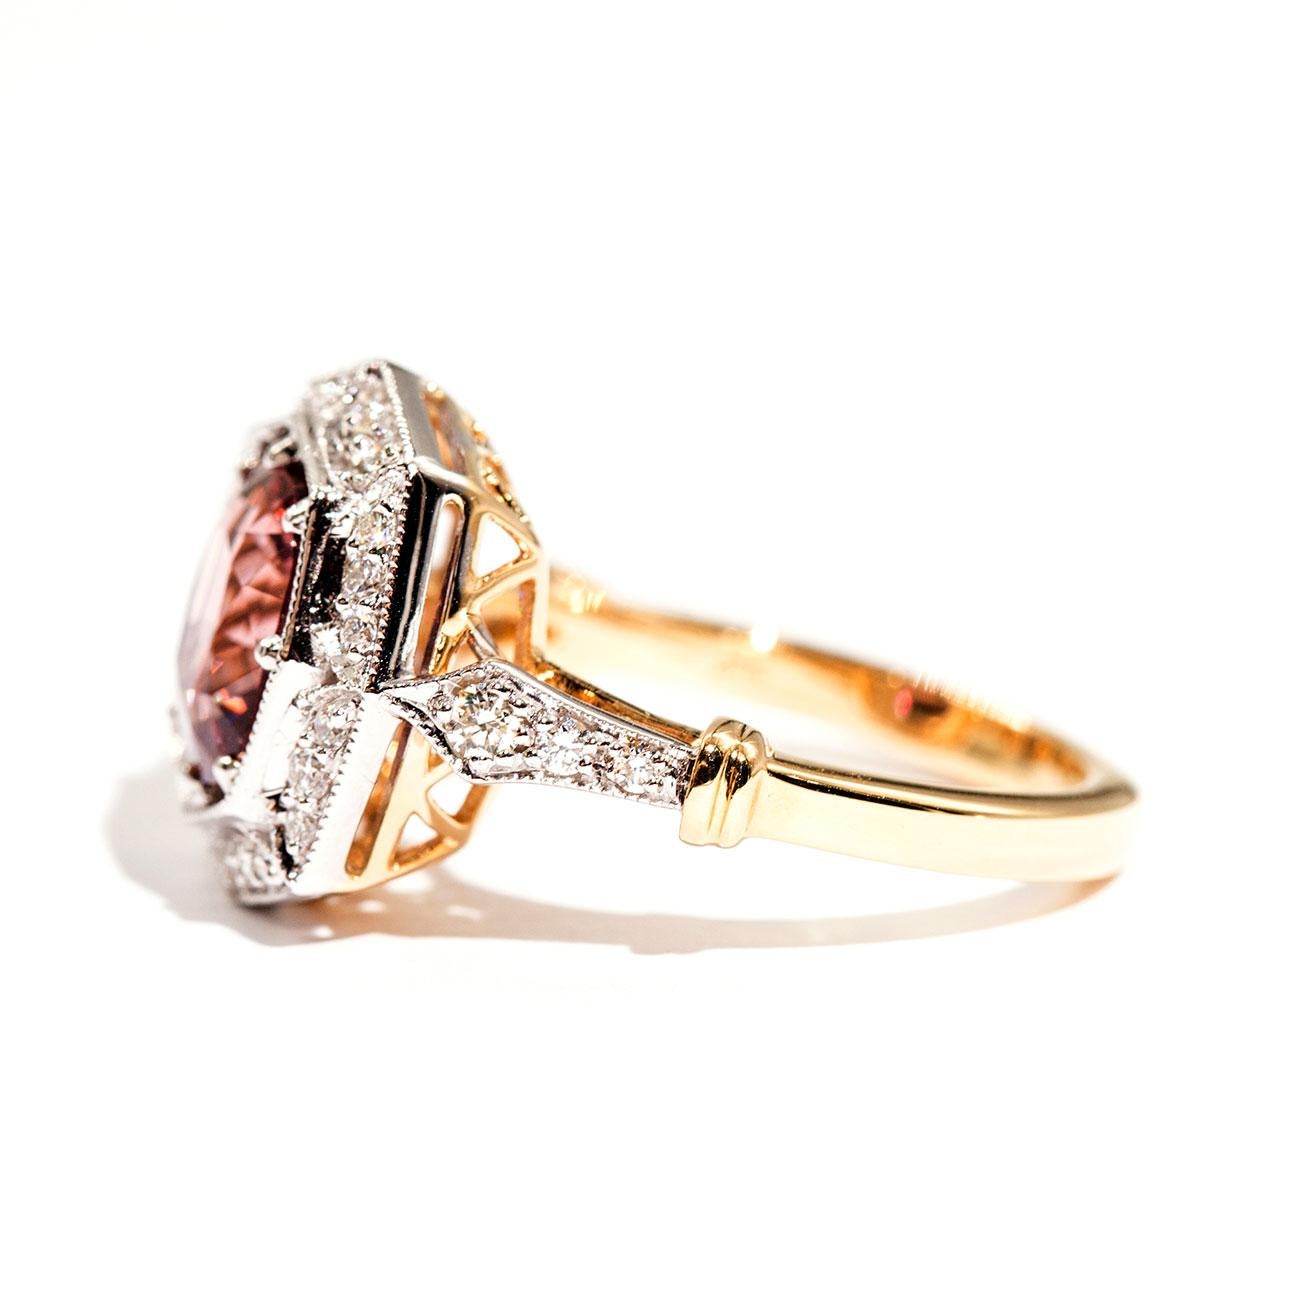 Women's 3.16 Carat Cushion Cut Red Pink Spinel and Diamond 18 Carat Gold Halo Ring